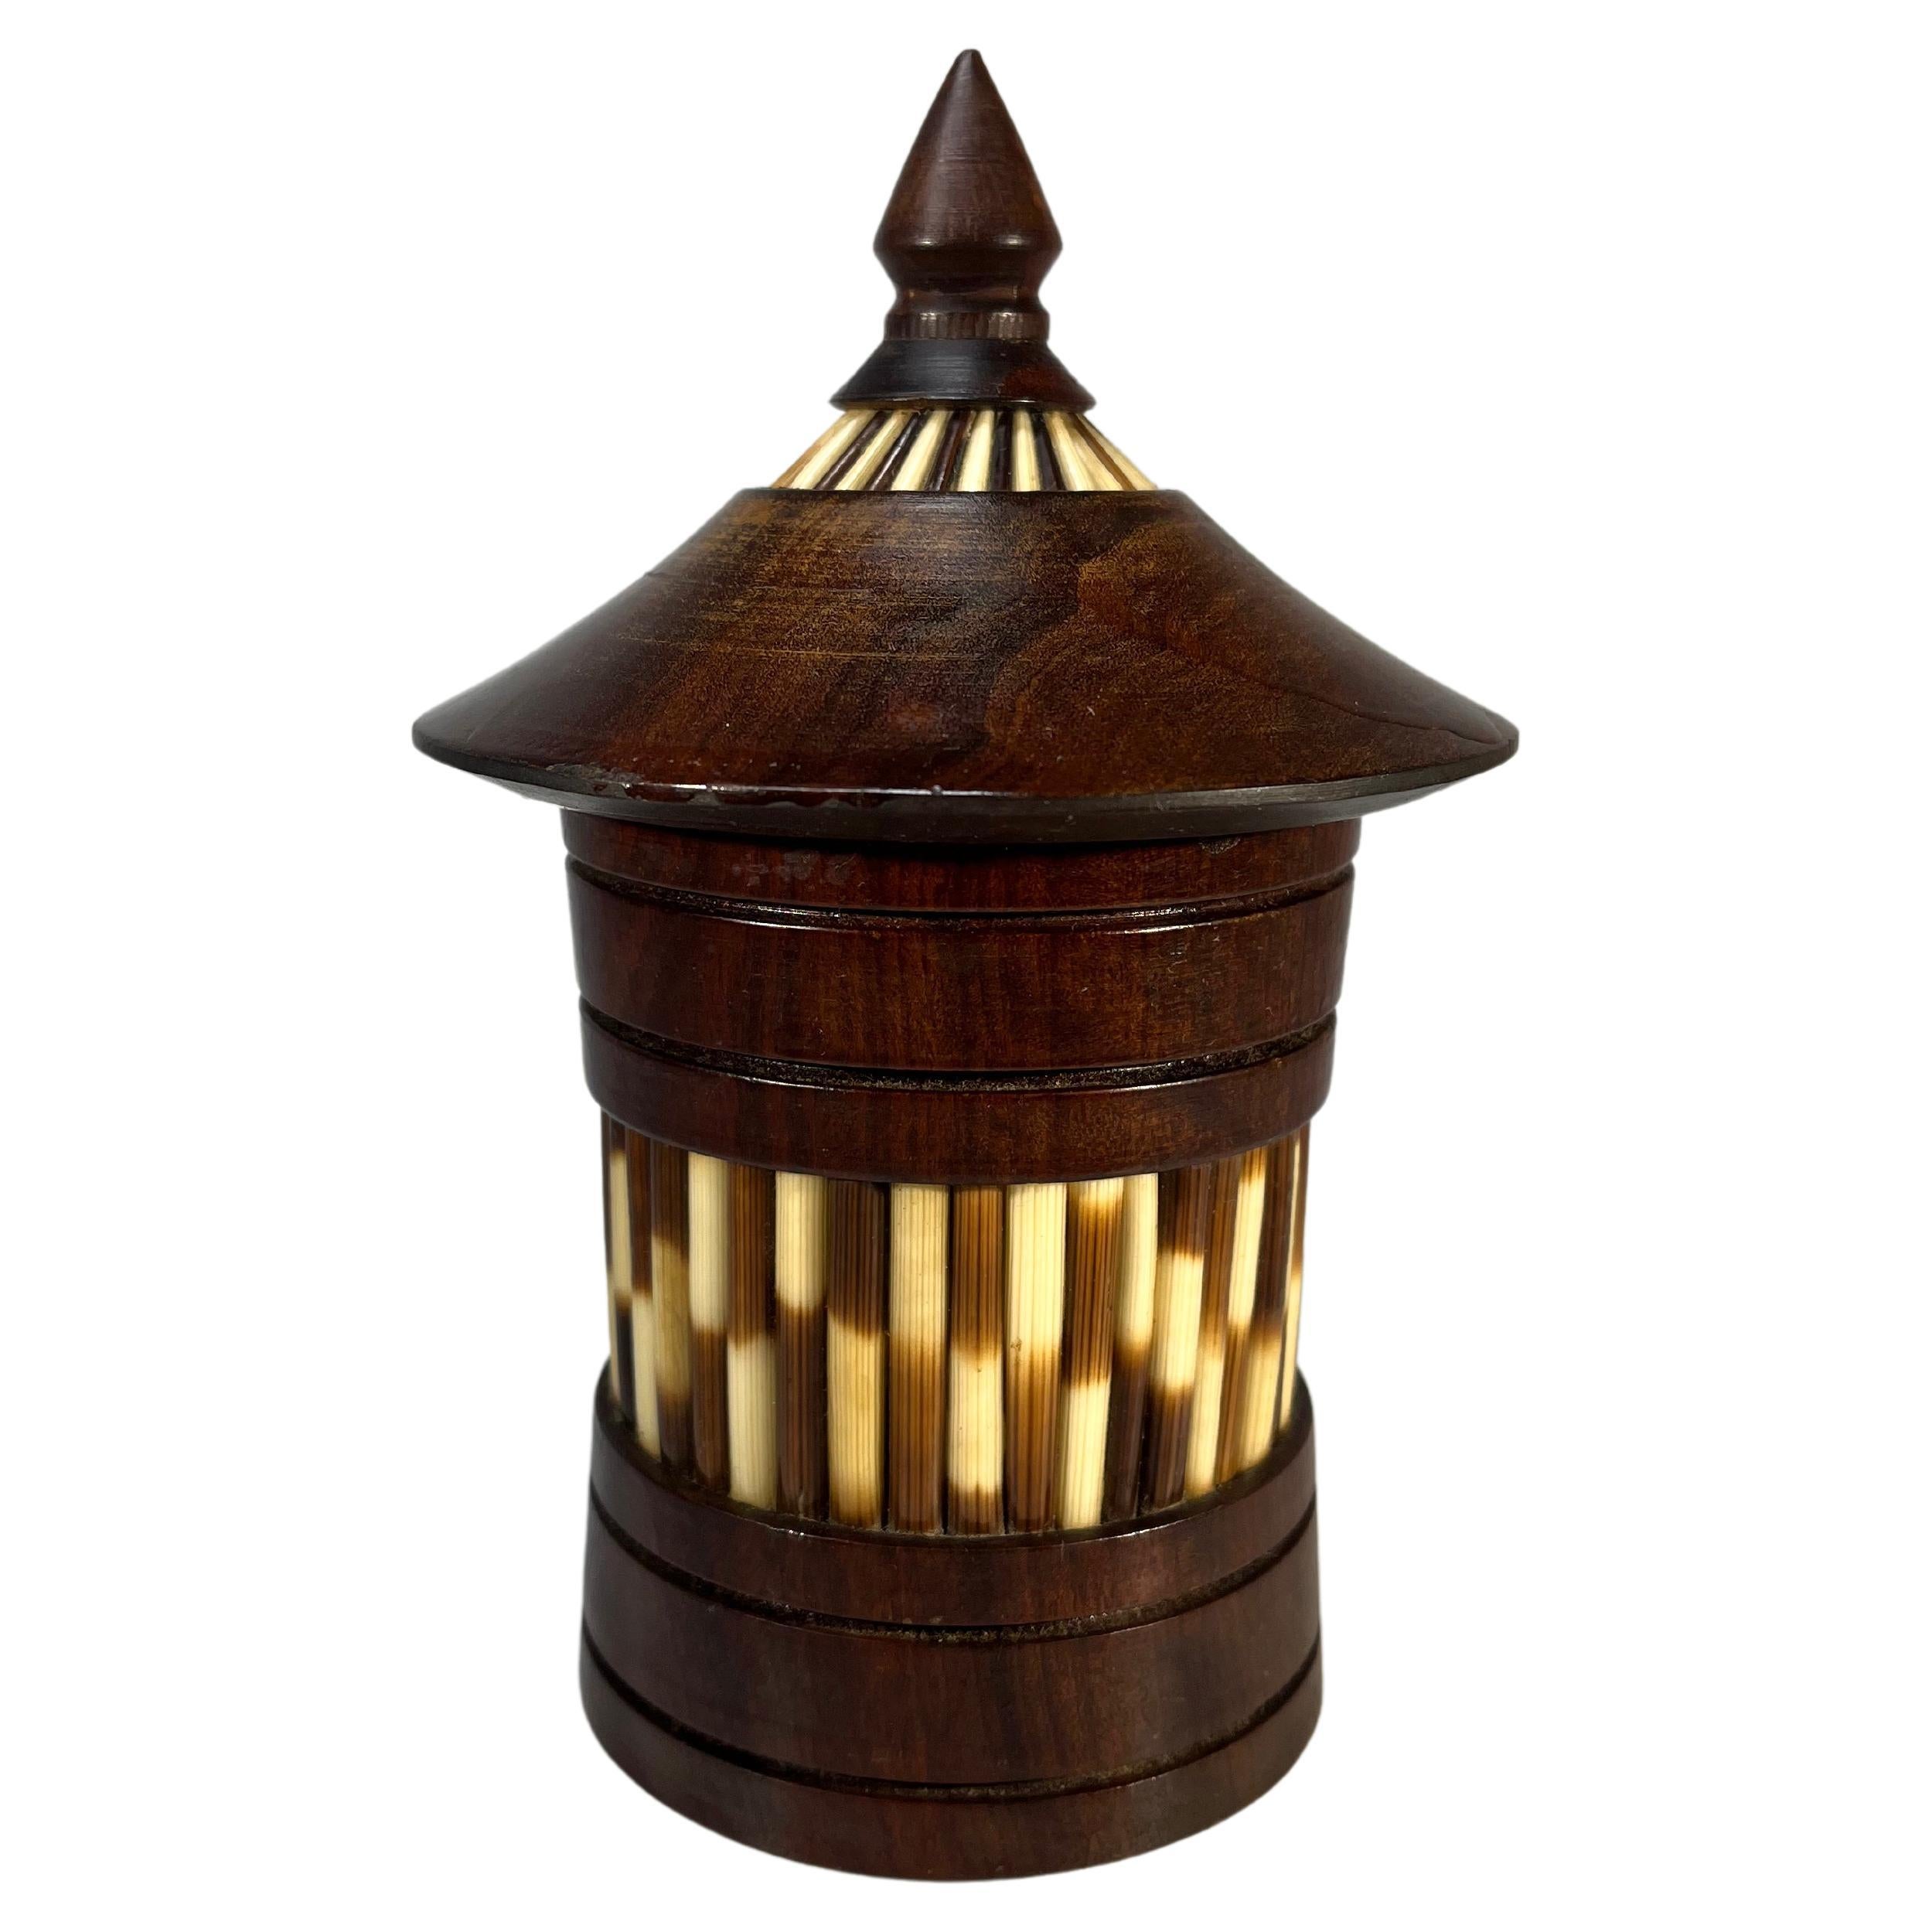 Beautifully Styled Ceylonese Porcupine Quill, Lidded Dark Wood Conical Pot